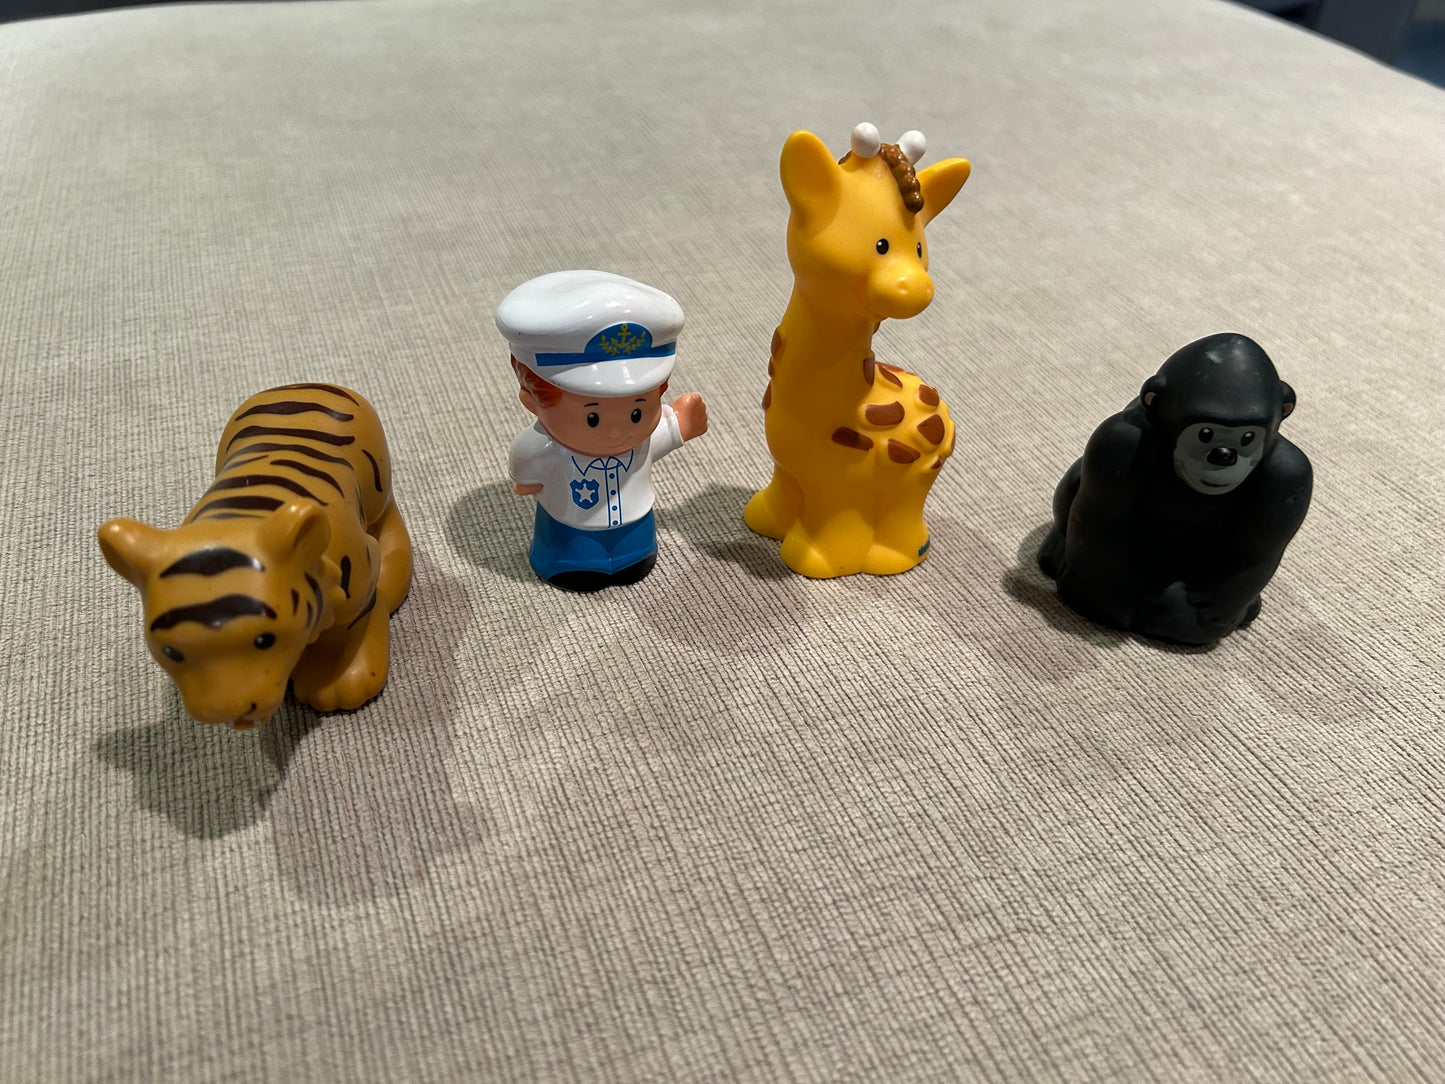 Little People Musical  Zoo Train with driver and animals EUC